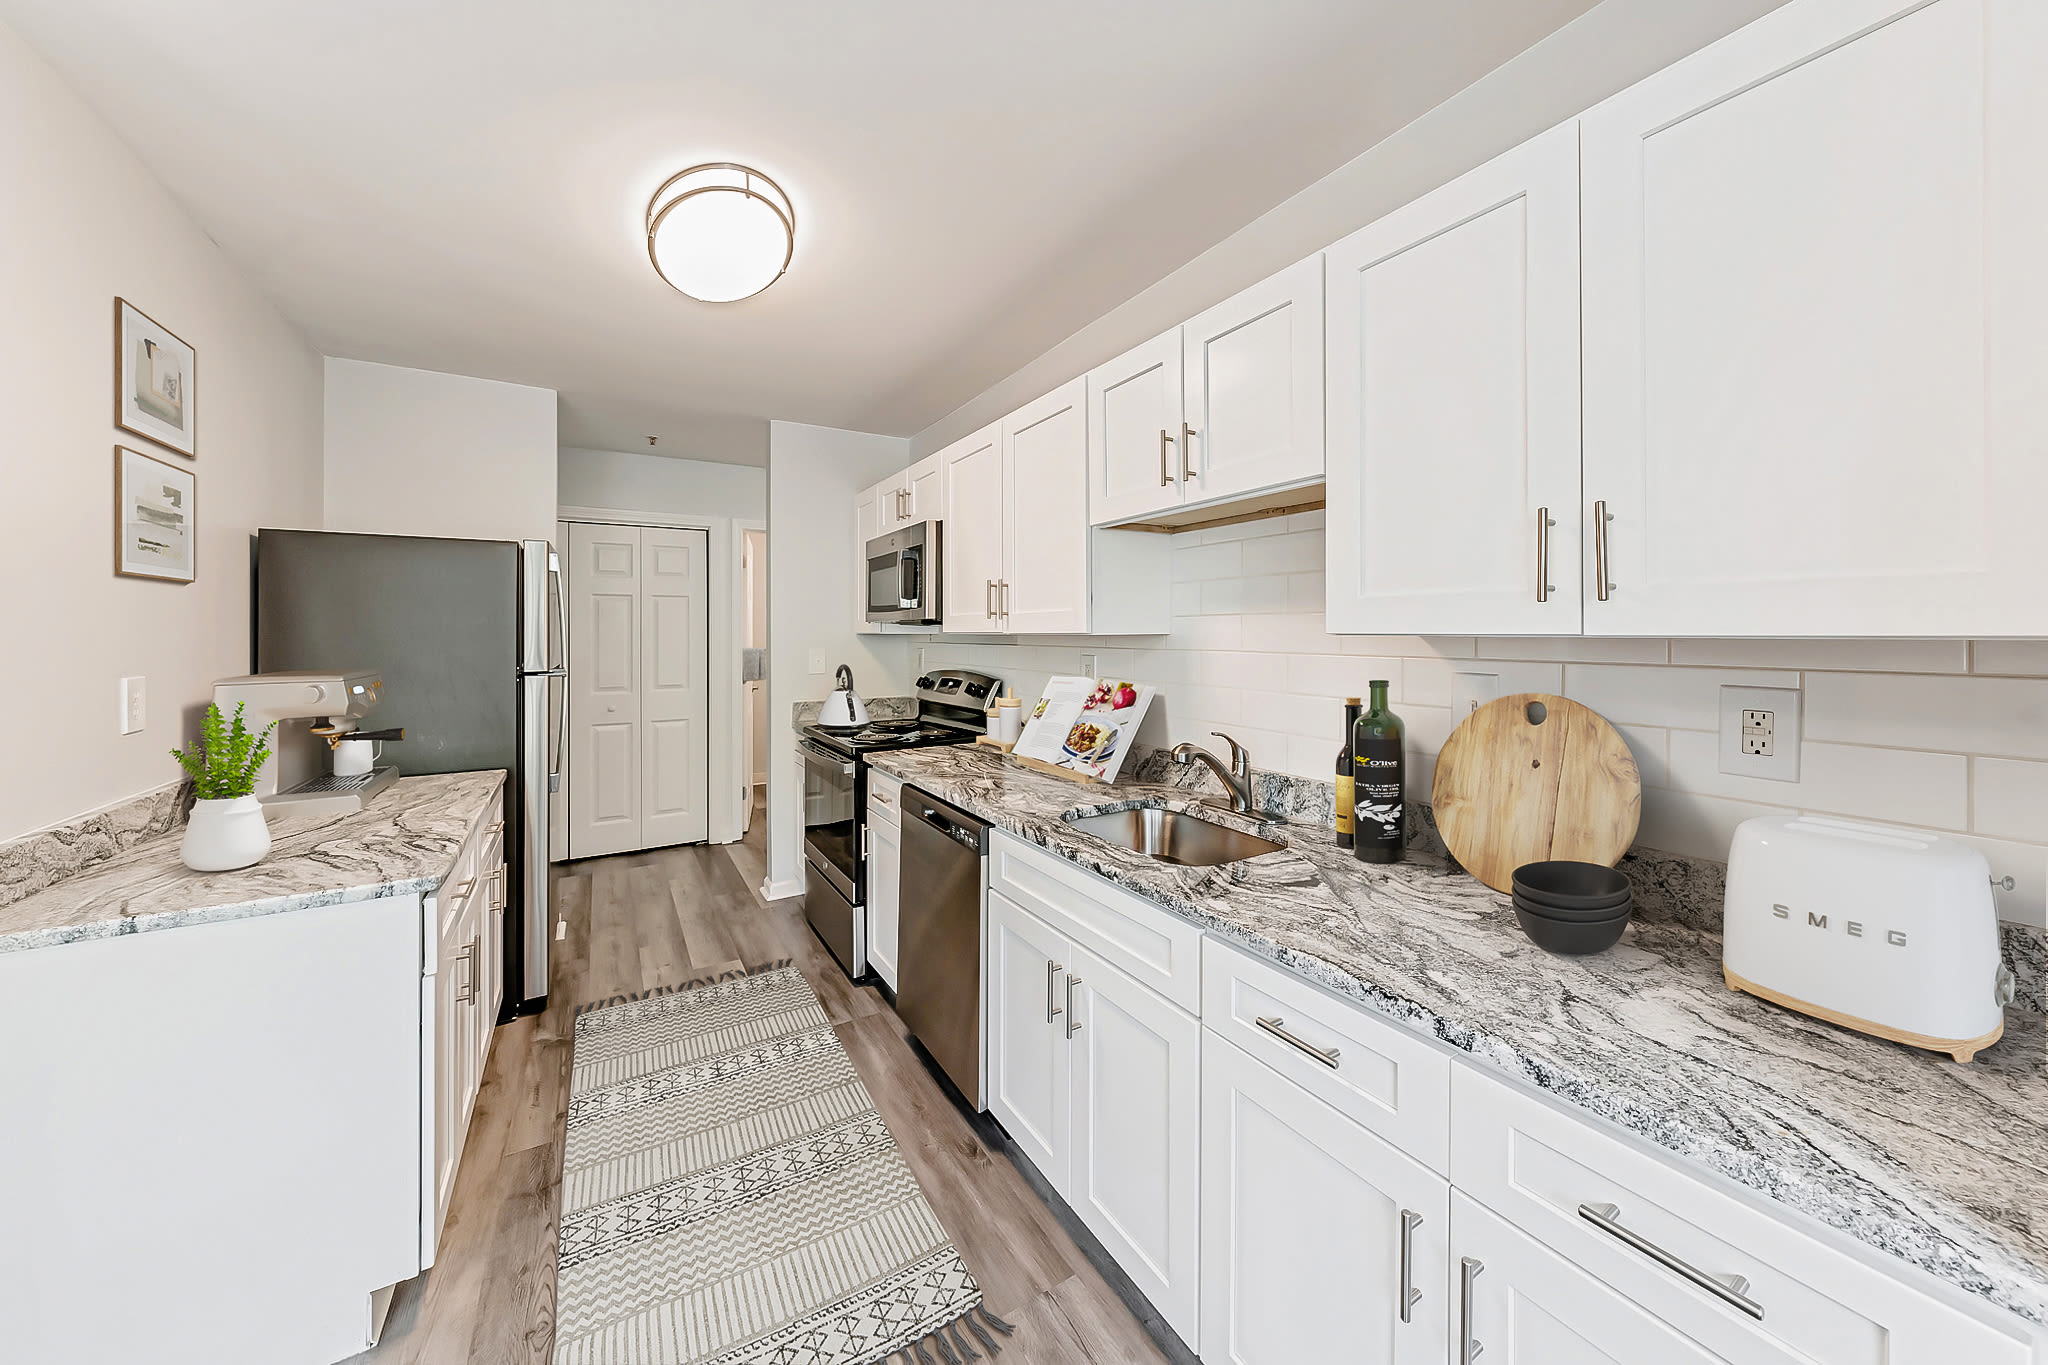 Our Modern Apartments in East Haven, Connecticut showcase a Kitchen